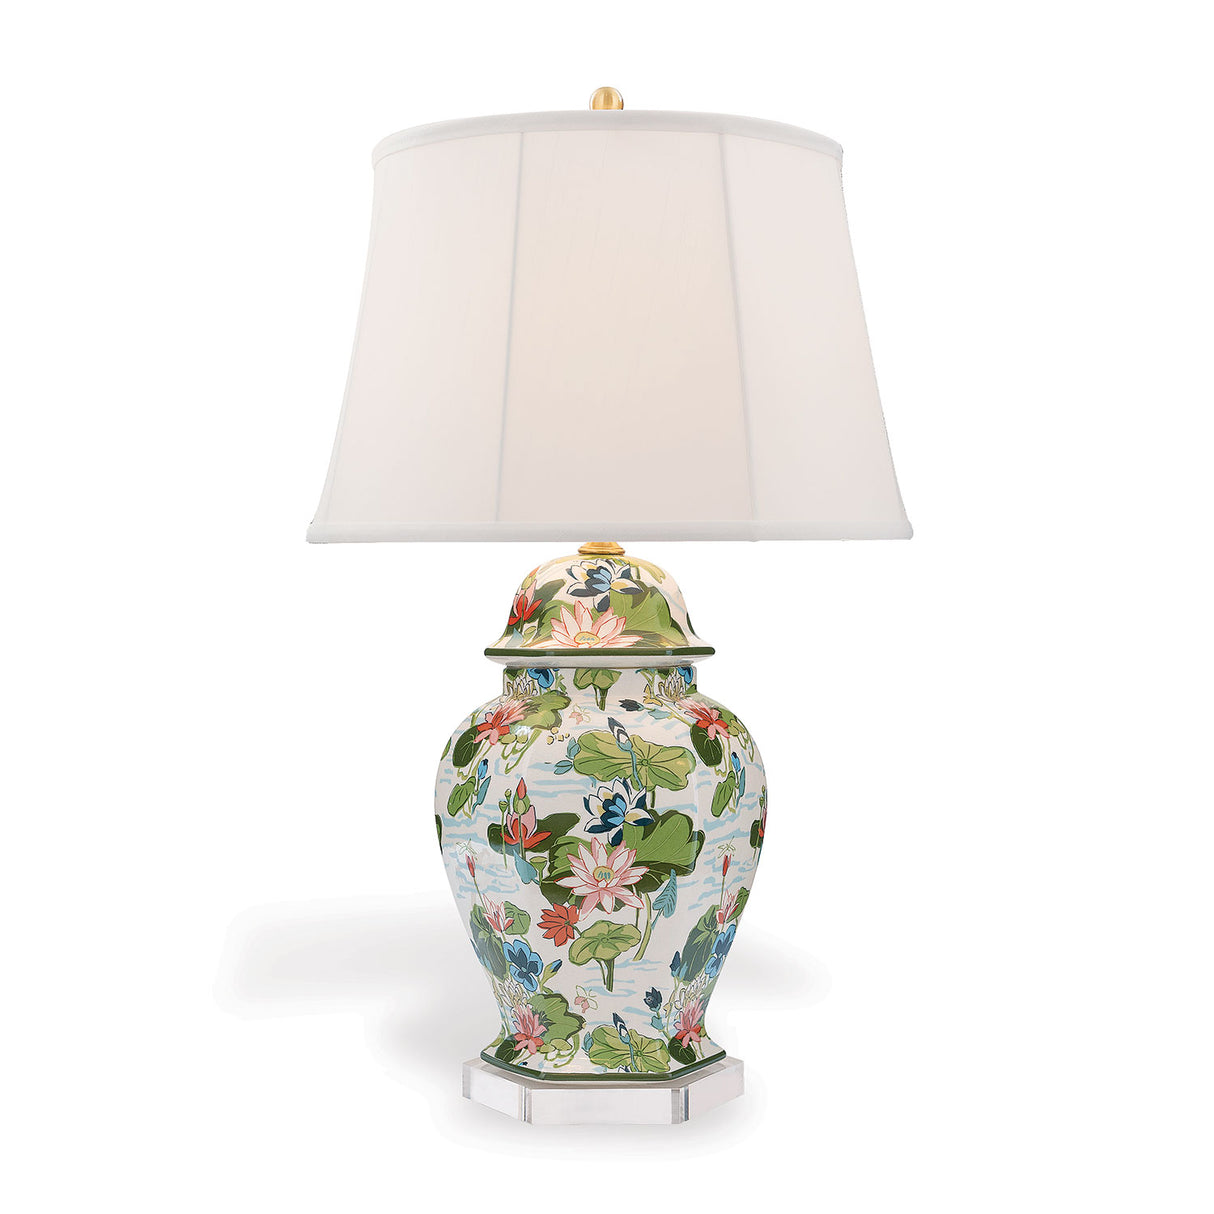 Lily Pond Lane Multicolor Table Lamp